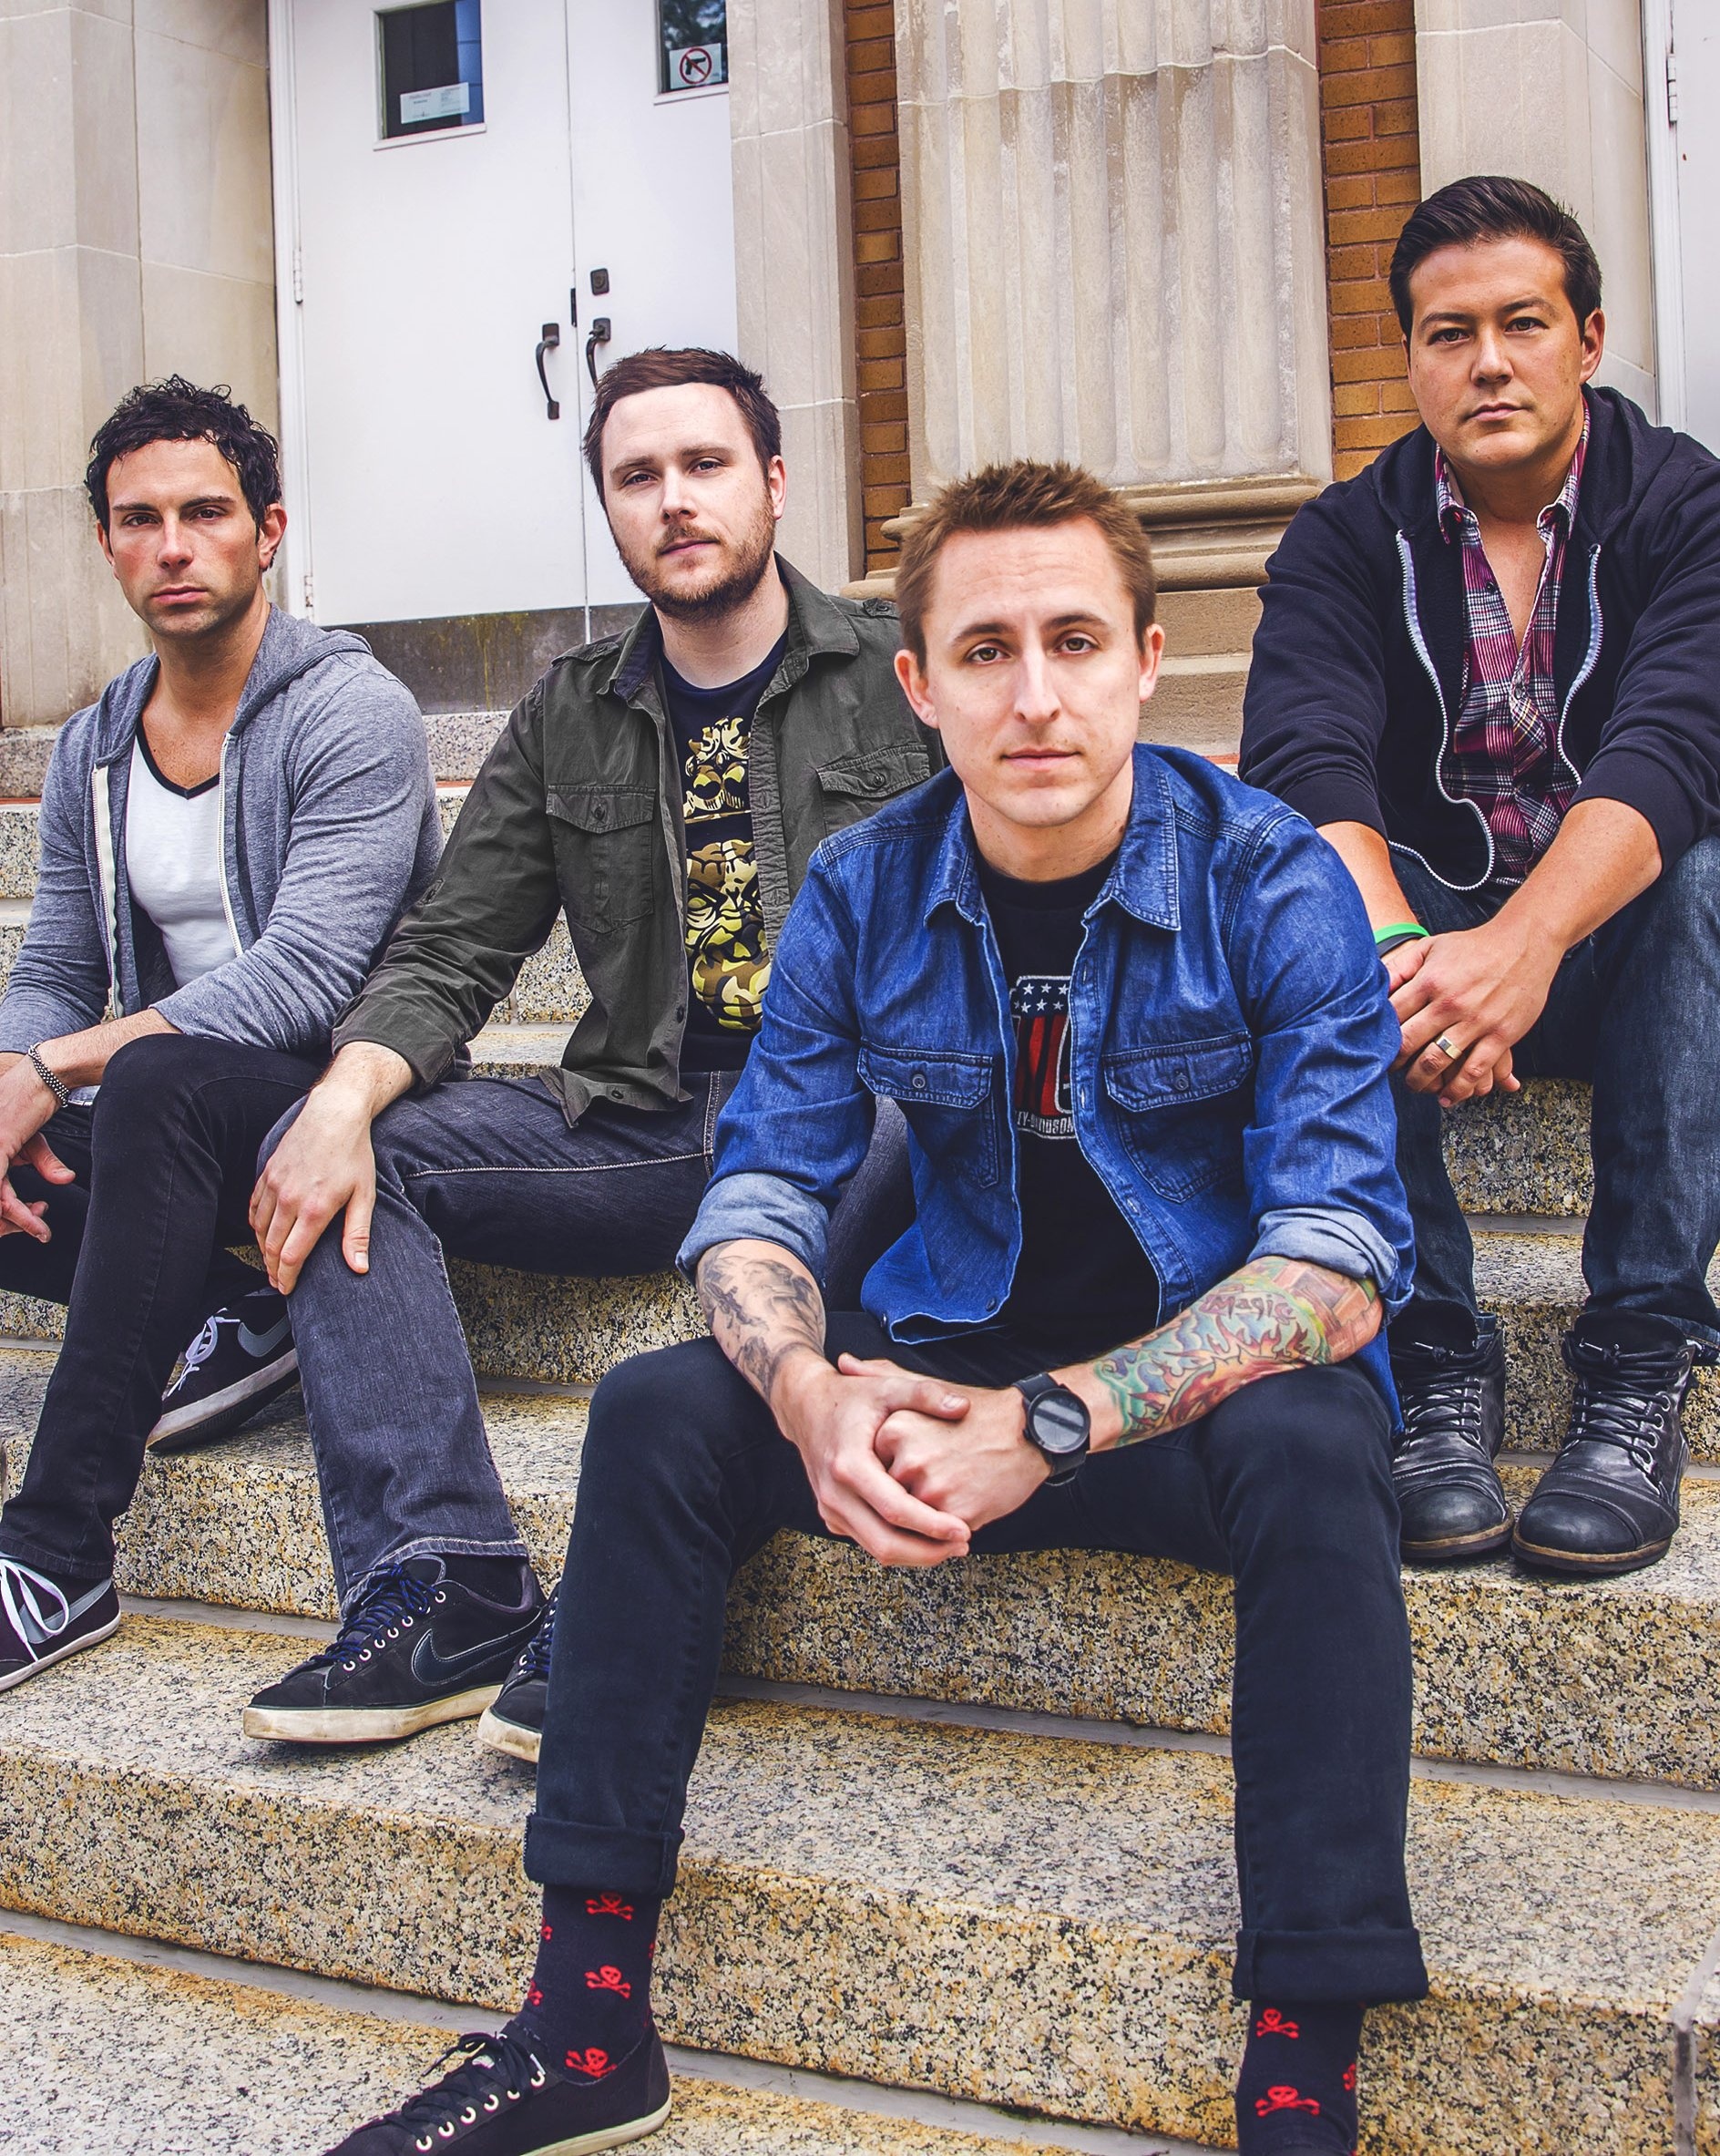 Download yellowcard images for free 1890x2370